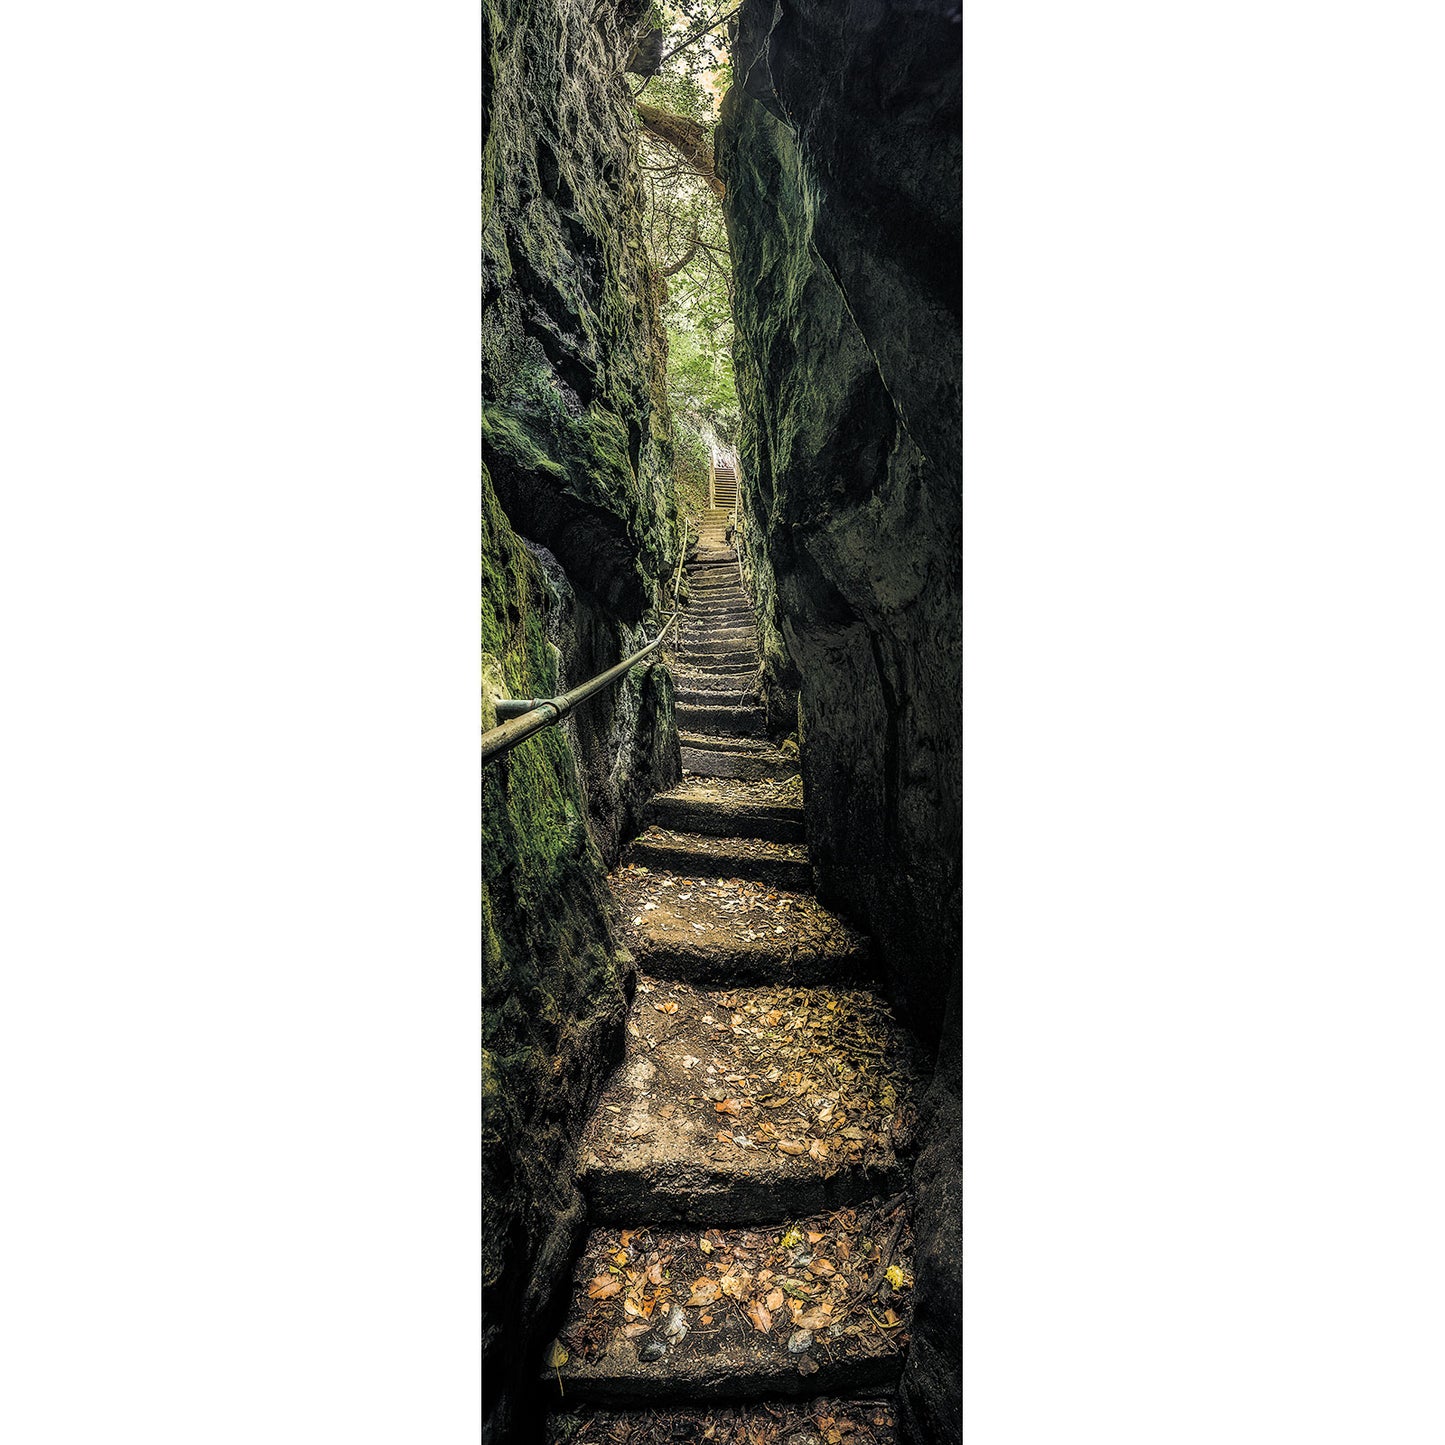 A narrow stone stairway ascending through a crevice between rock walls, lined with a wooden handrail and covered with fallen leaves, reminiscent of the eerie ambiance in Available Light Photography's Devil's Chimney.